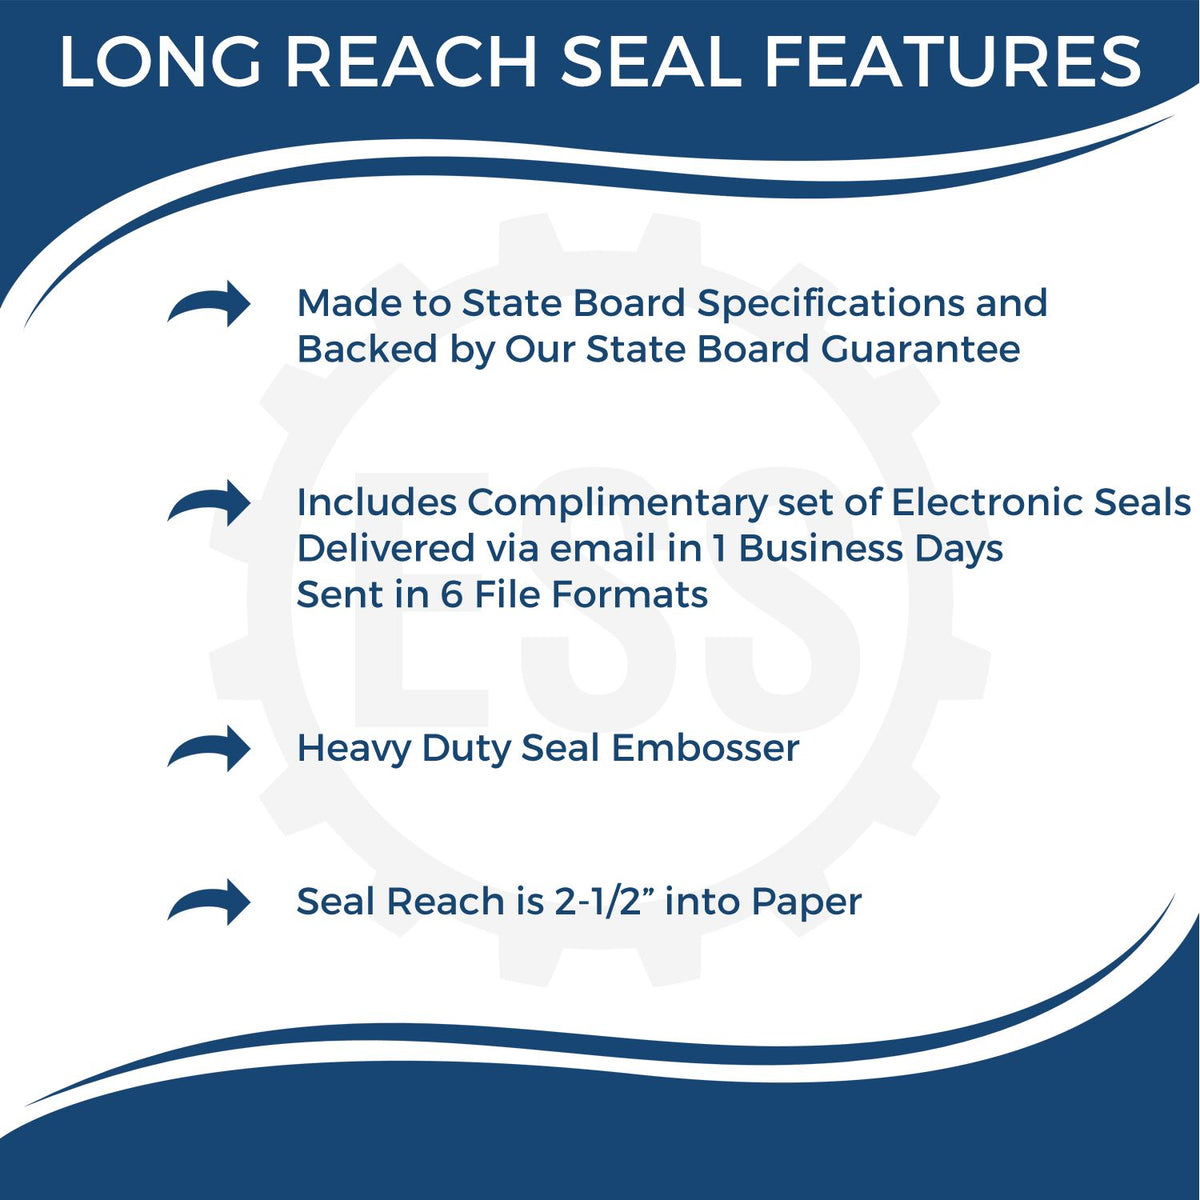 A picture of an infographic highlighting the selling points for the Long Reach Michigan PE Seal